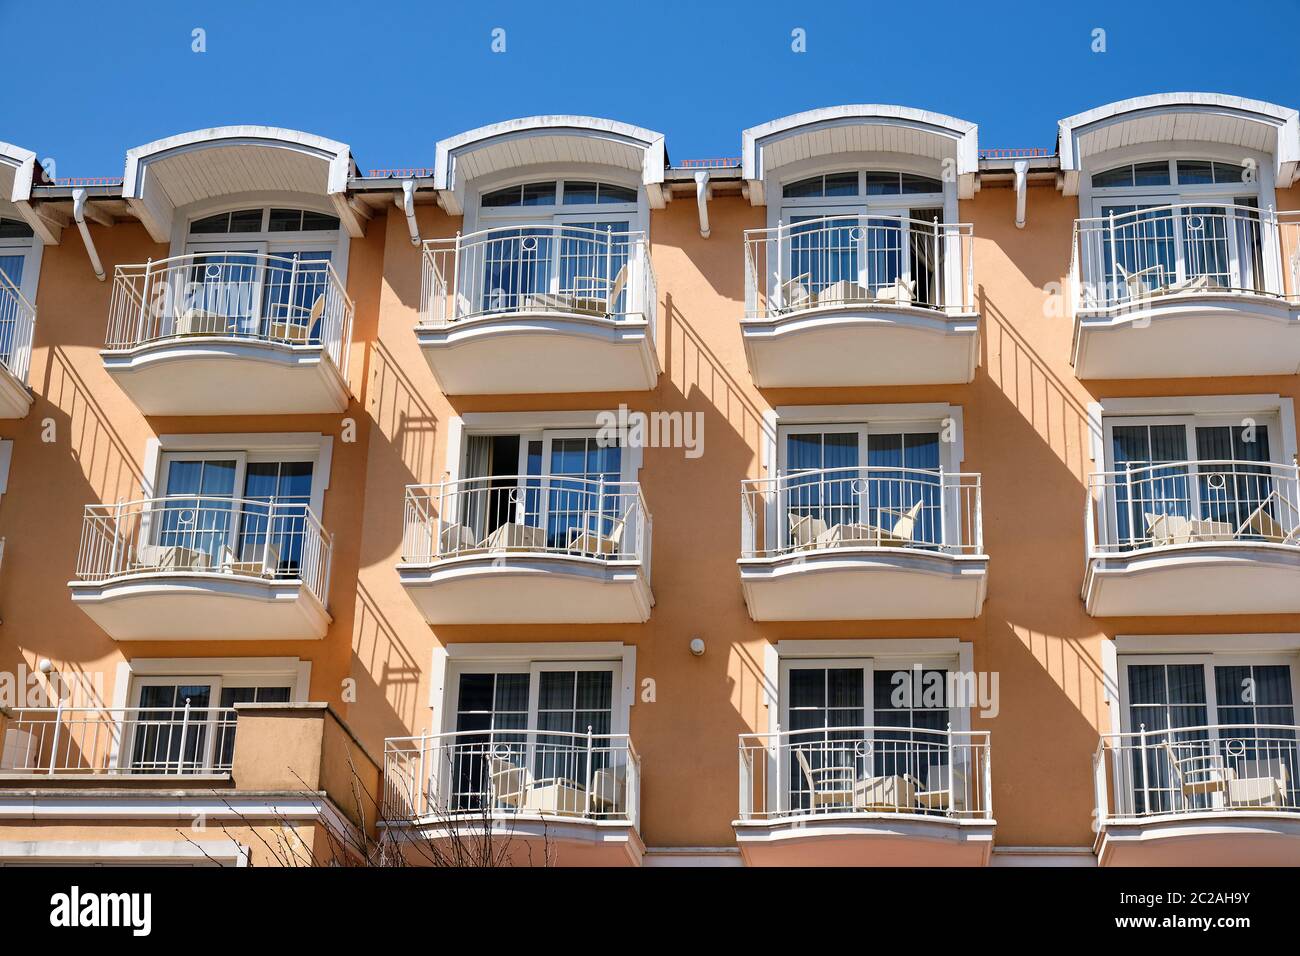 Facade of a tourist resort with a lot of balconies seen in Germany Stock Photo